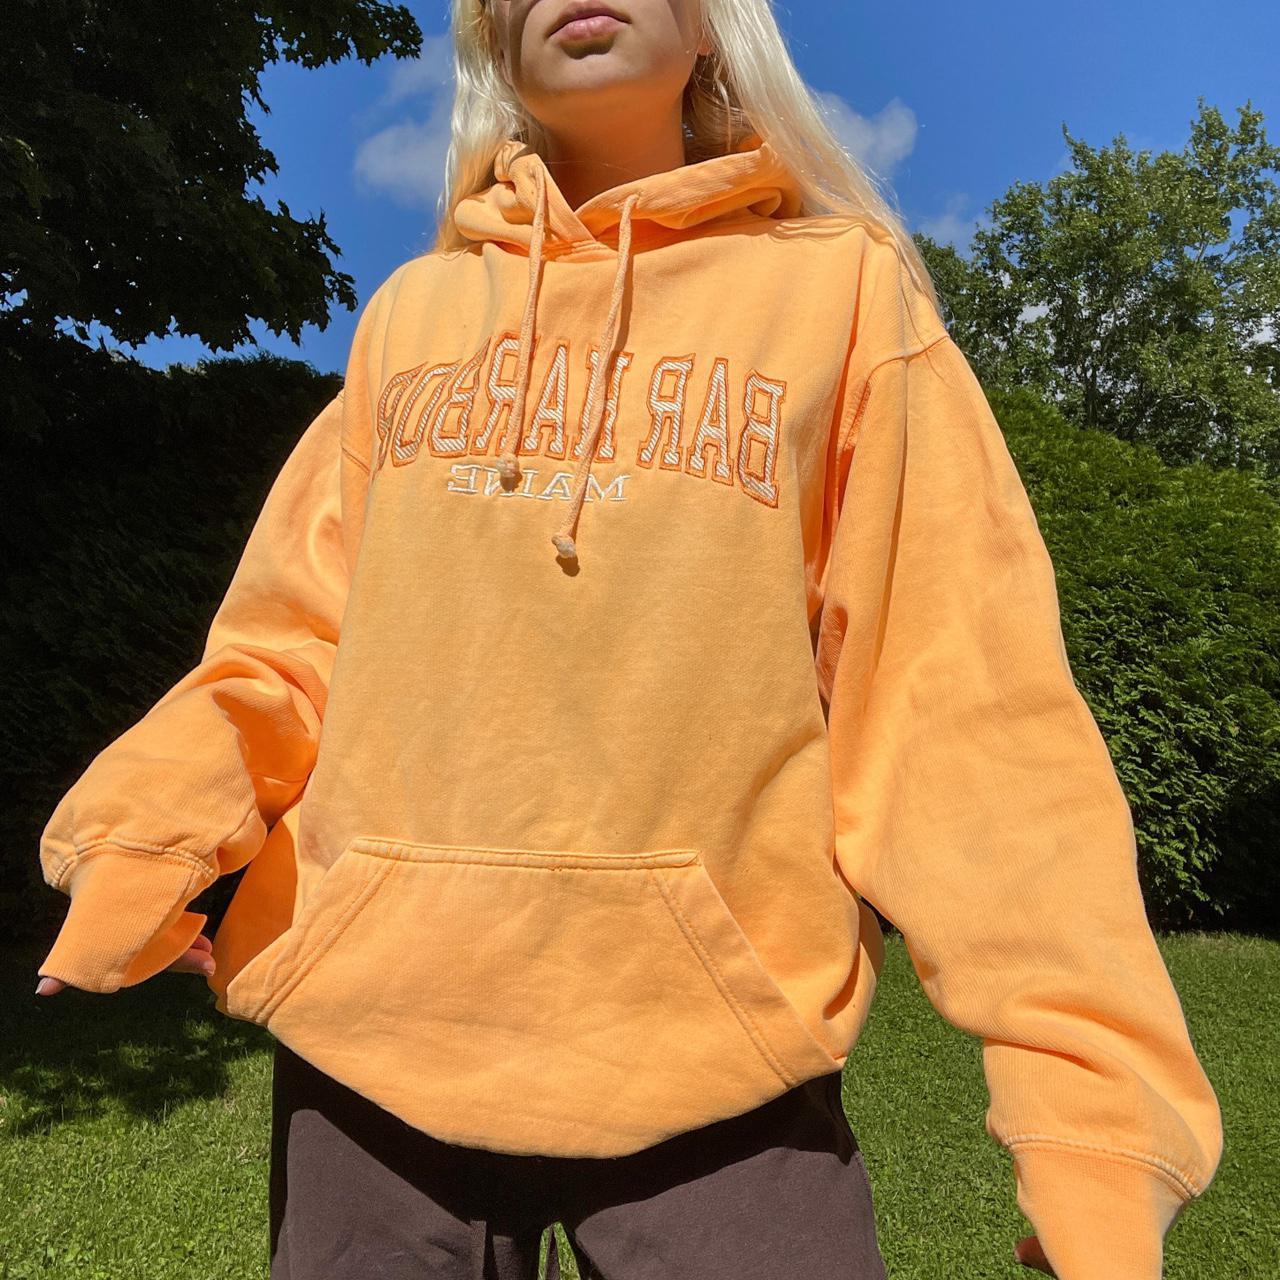 Product Image 1 - Bar Harbor Maine hoodie🌼

Adorable bright